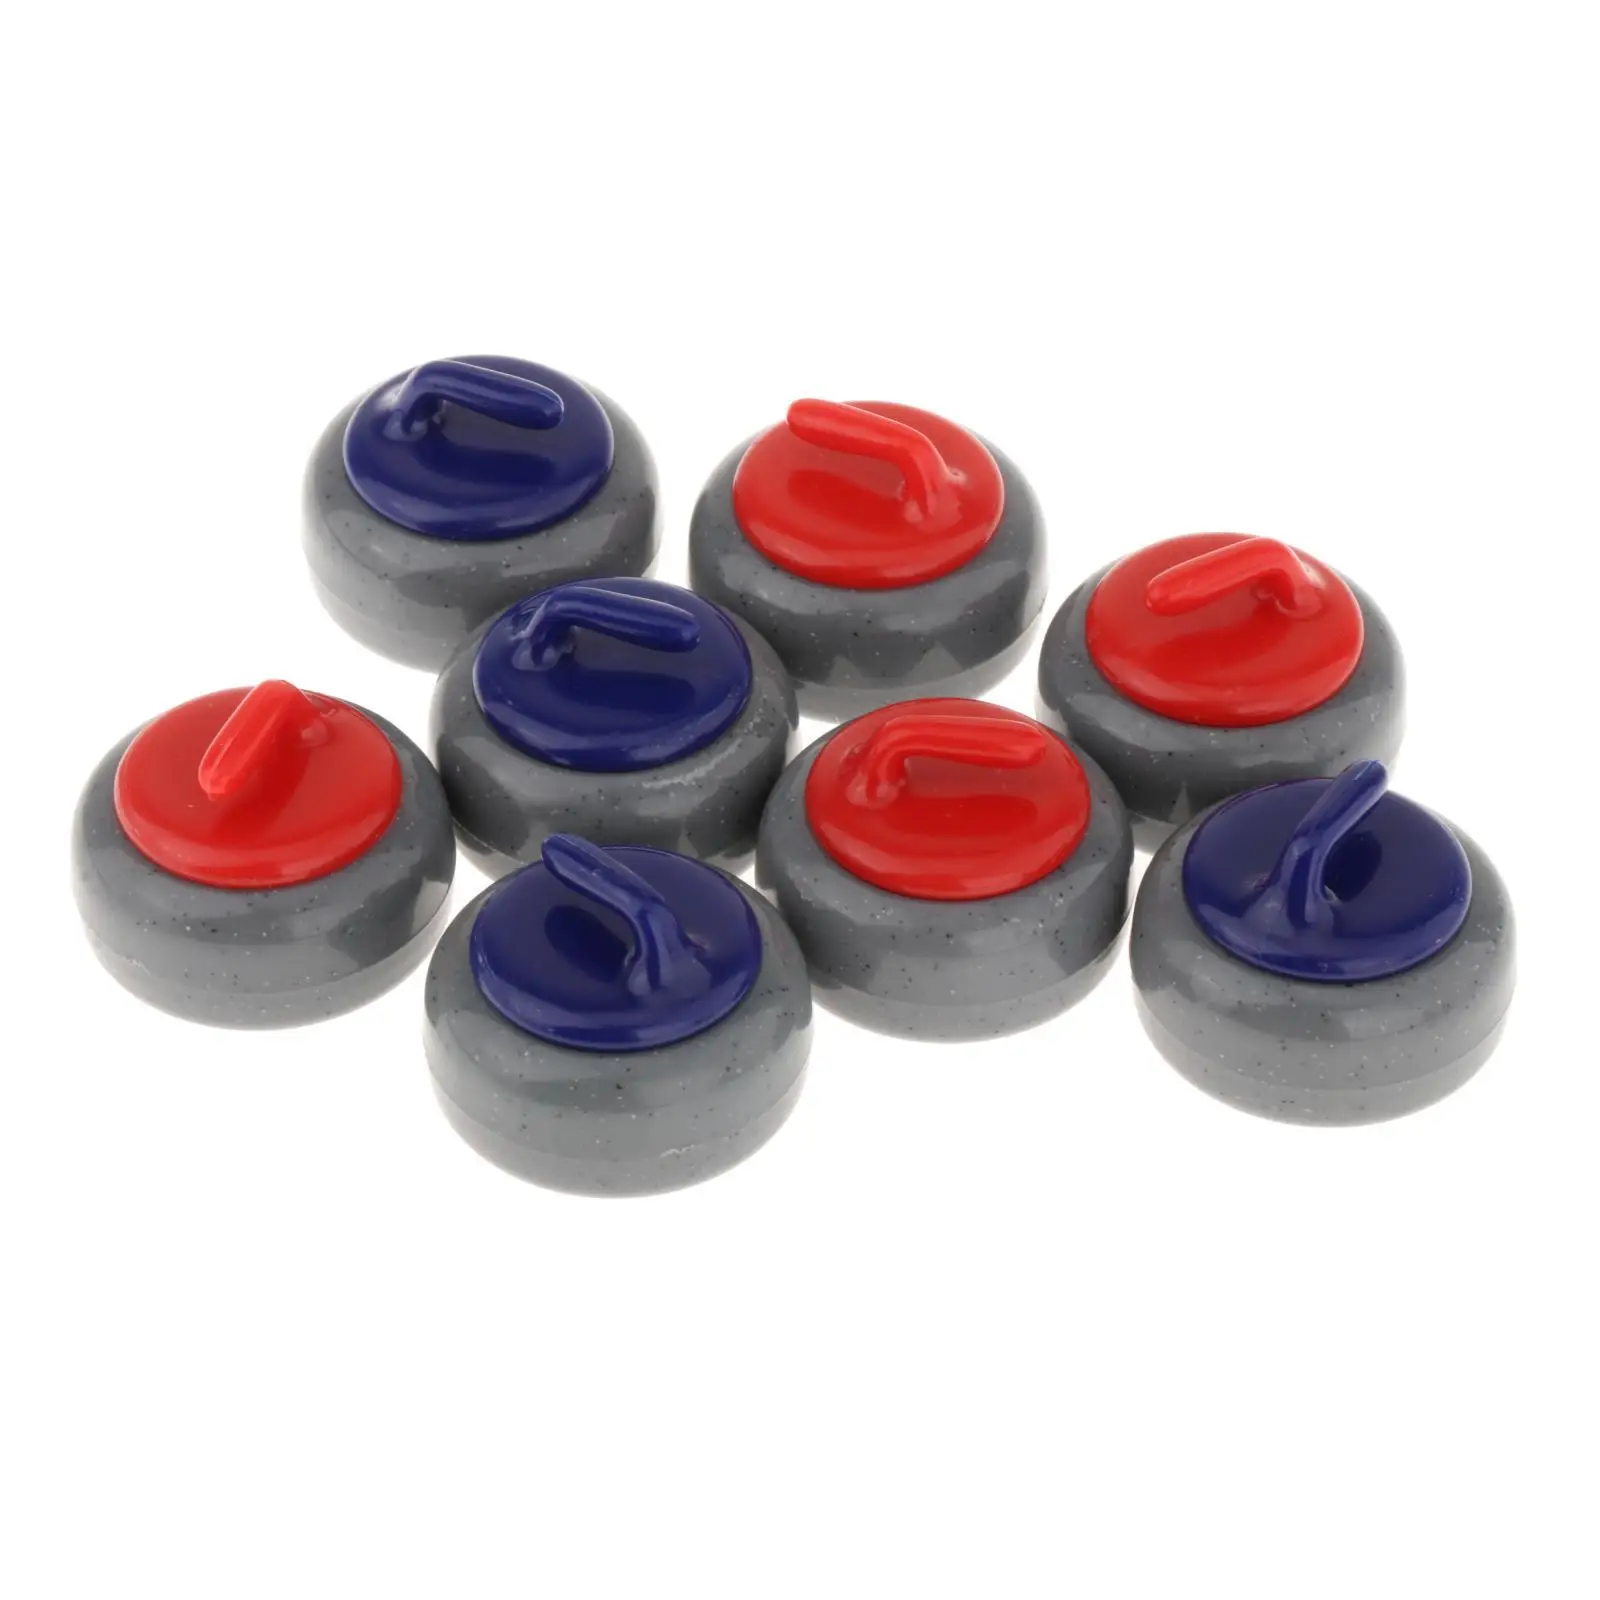 8x Tabletop Curling Game Pucks Floating Curling Ball Kids Adults Travel Portable Sports Toy Replacement Shuffleboard Rollers